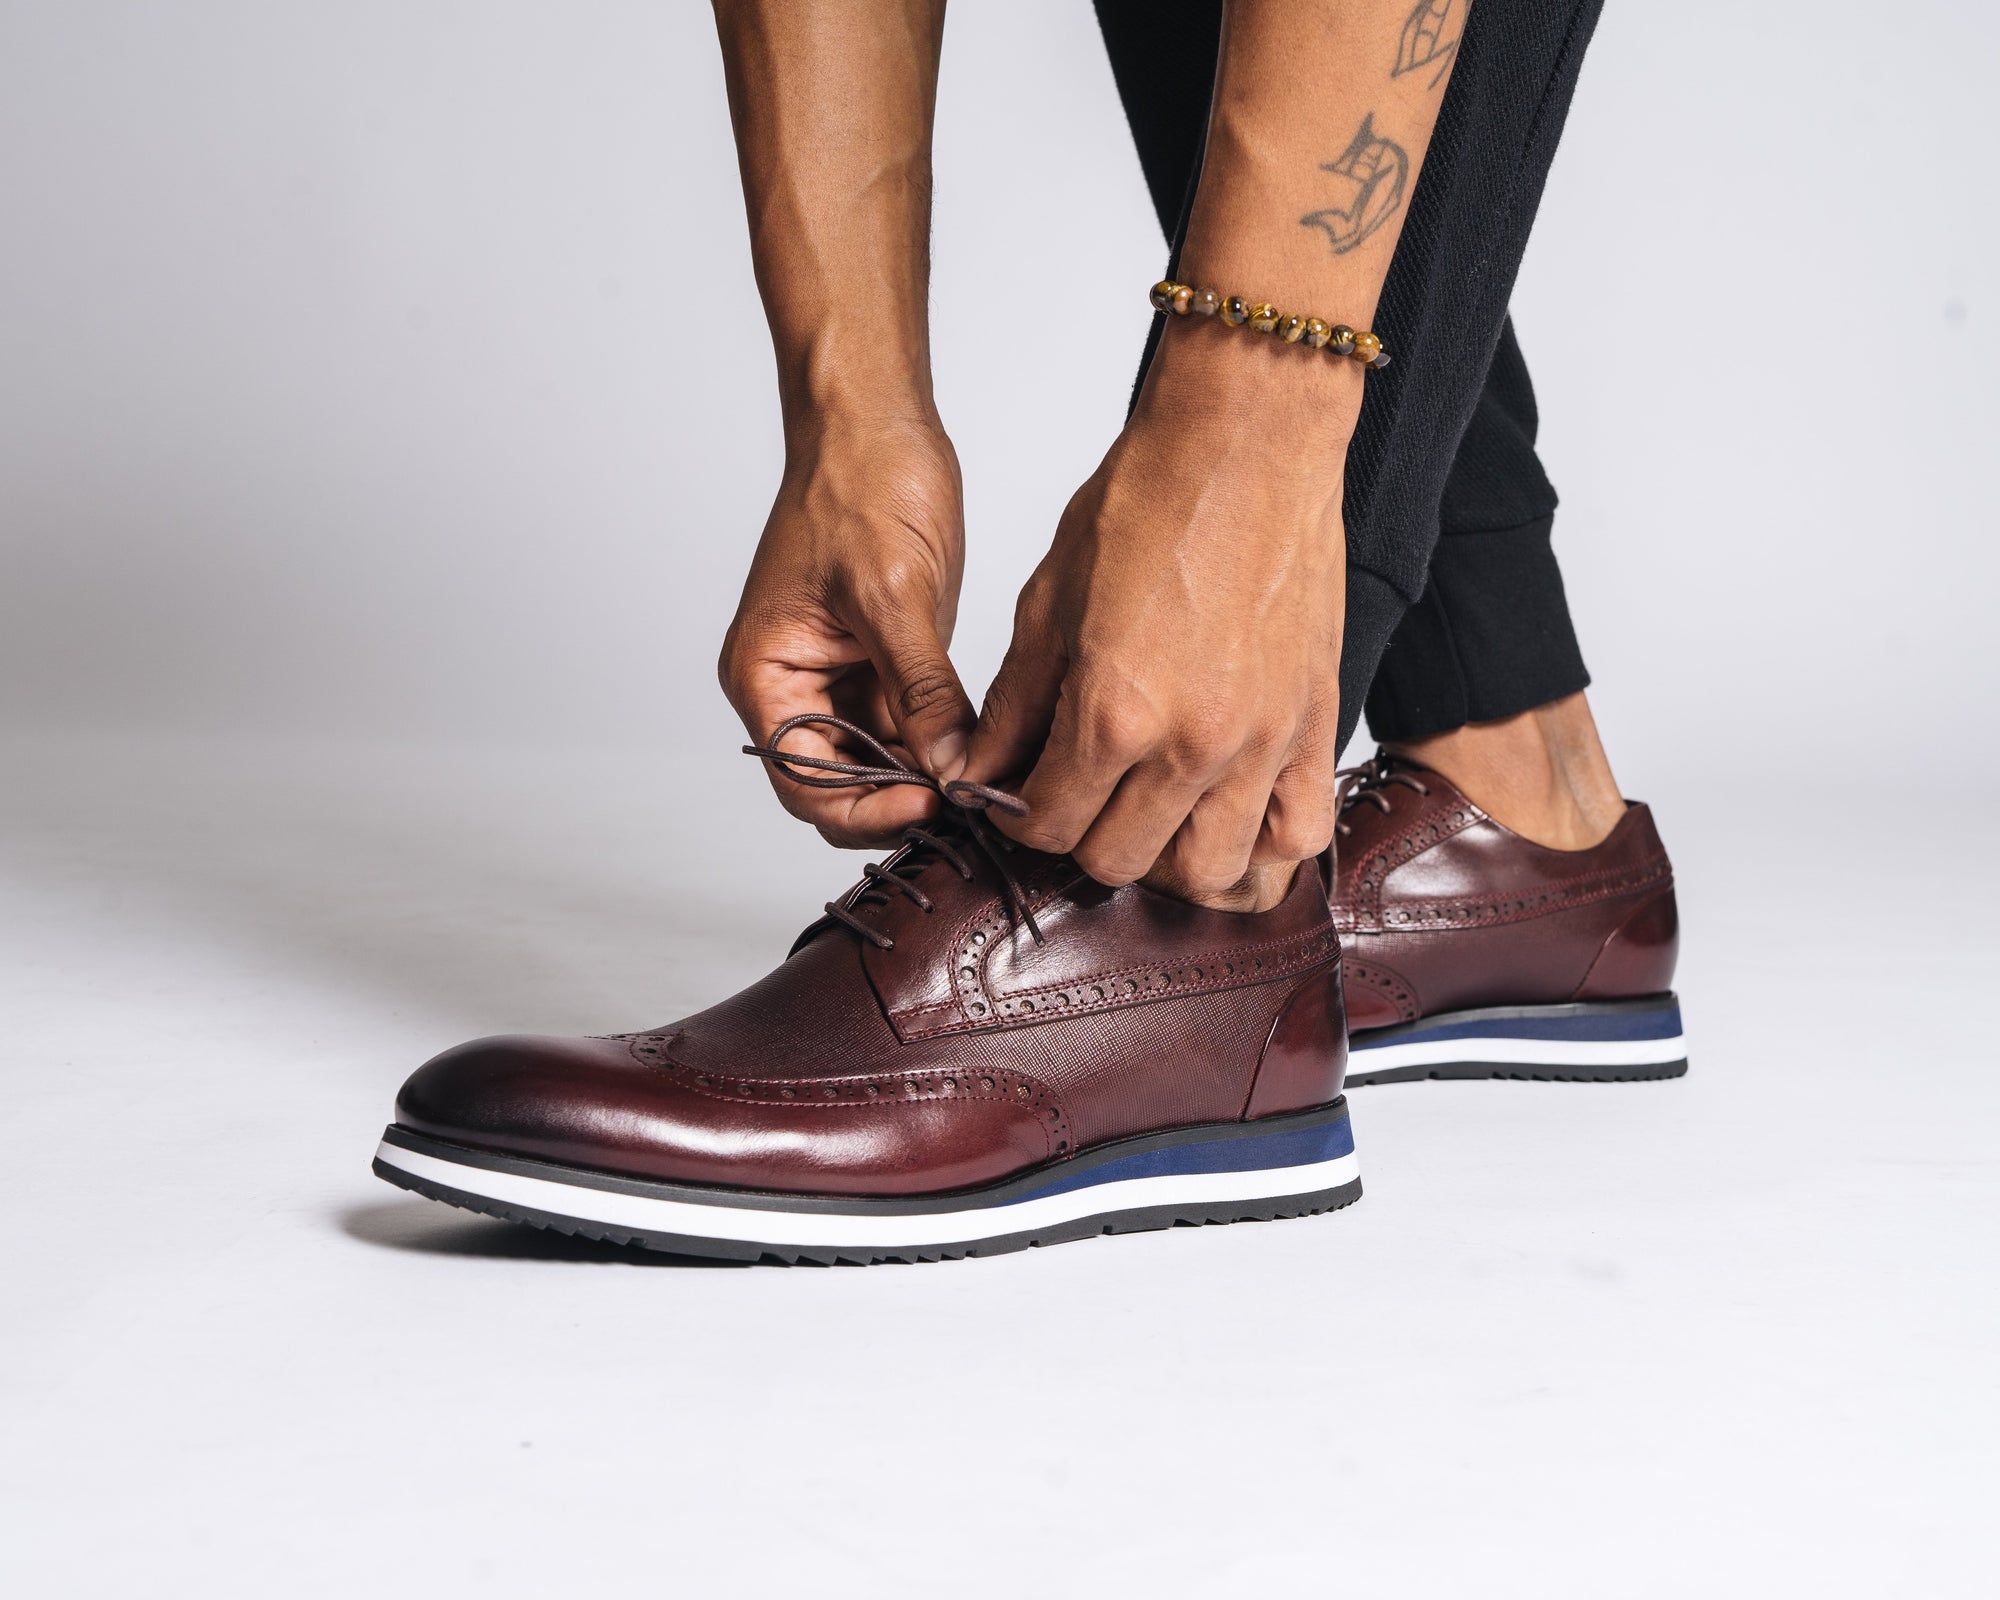 Sneaker dress shoes are the best men’s shoes for spring. Marc Nolan creates the most comfortable mens shoes for work. 